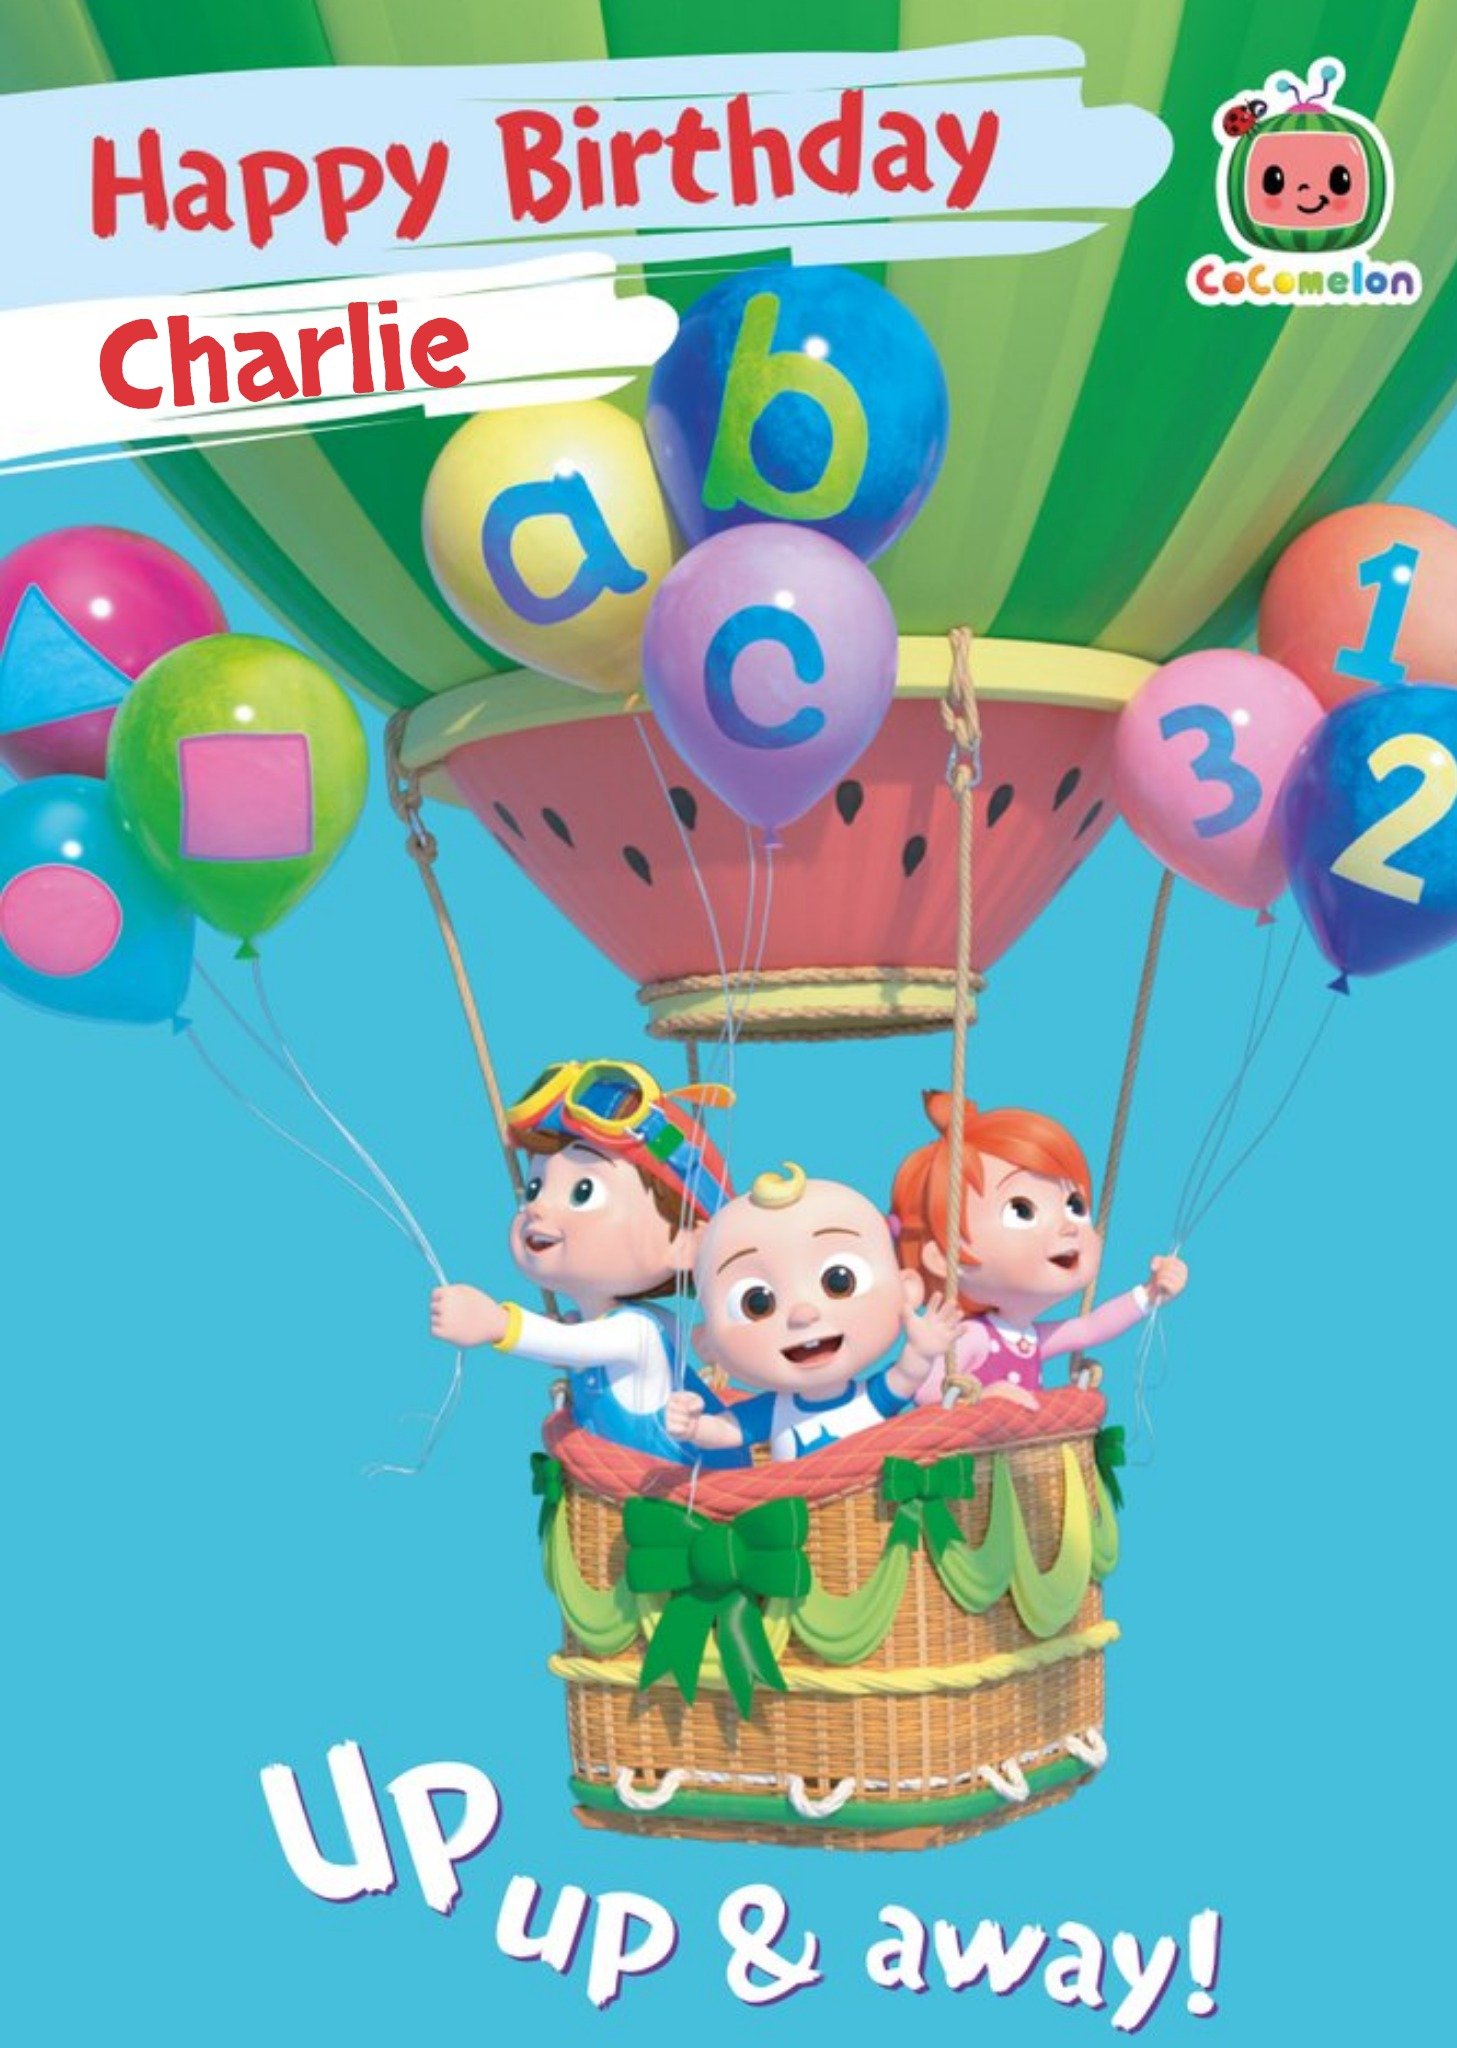 Moonpig Coco Melon. Illustration Of Jj, Yoyo And Tomtom In A Hot Air Balloon Birthday Card, Large